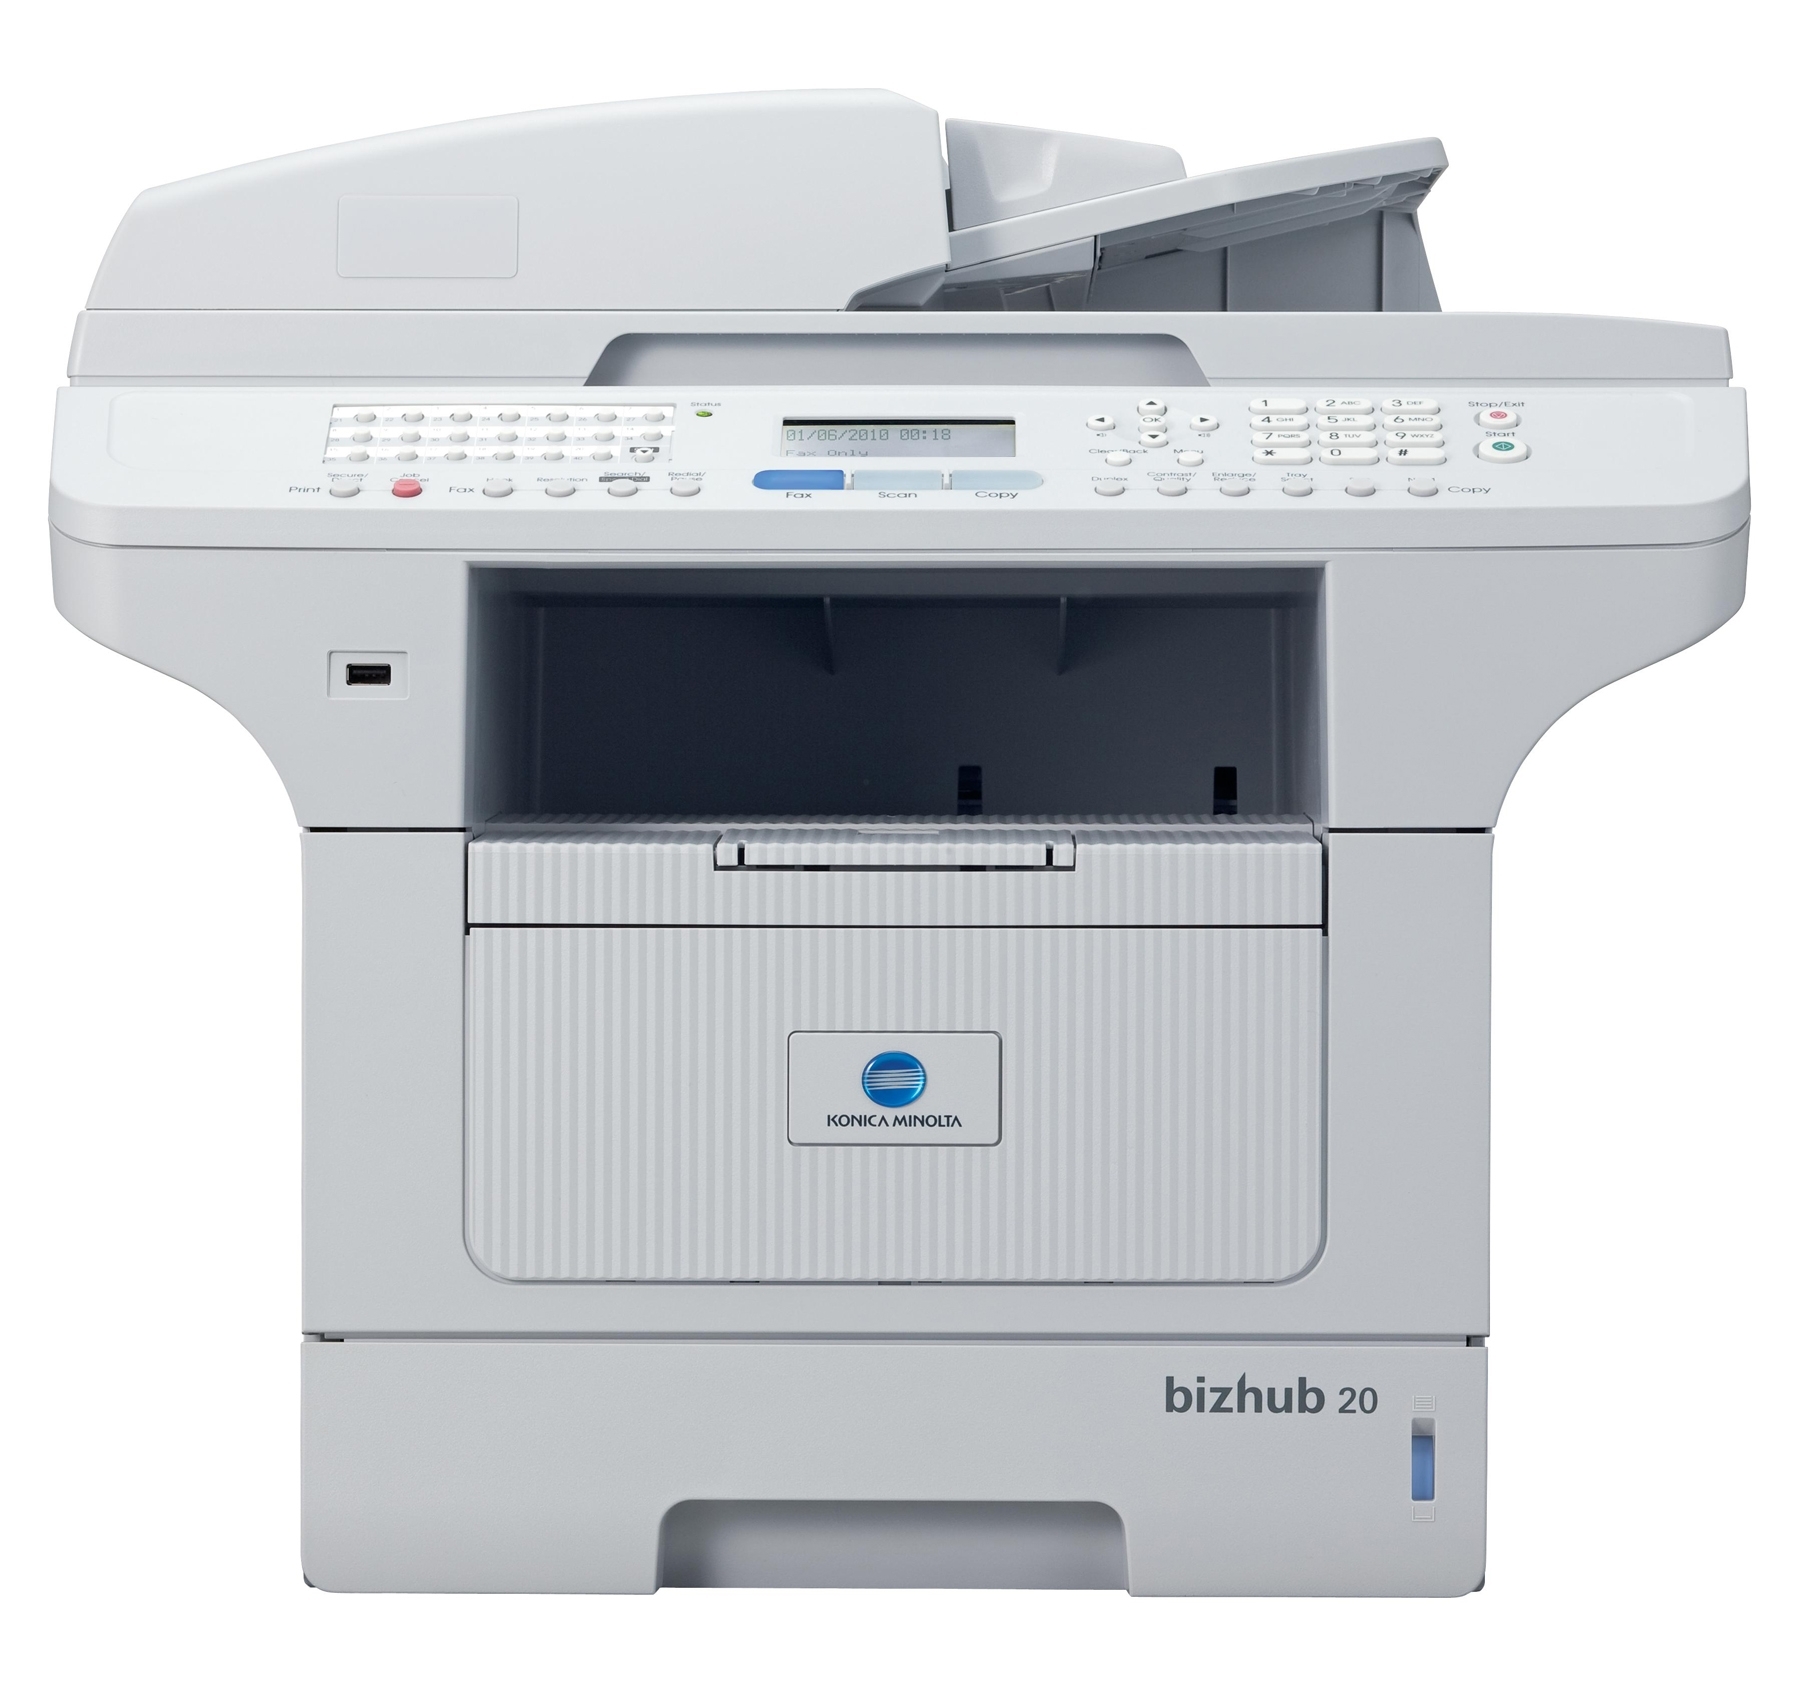 Konica Minolta Delivers Fast Output Speed and Small Footprint with the bizhub 20 and bizhub 20P